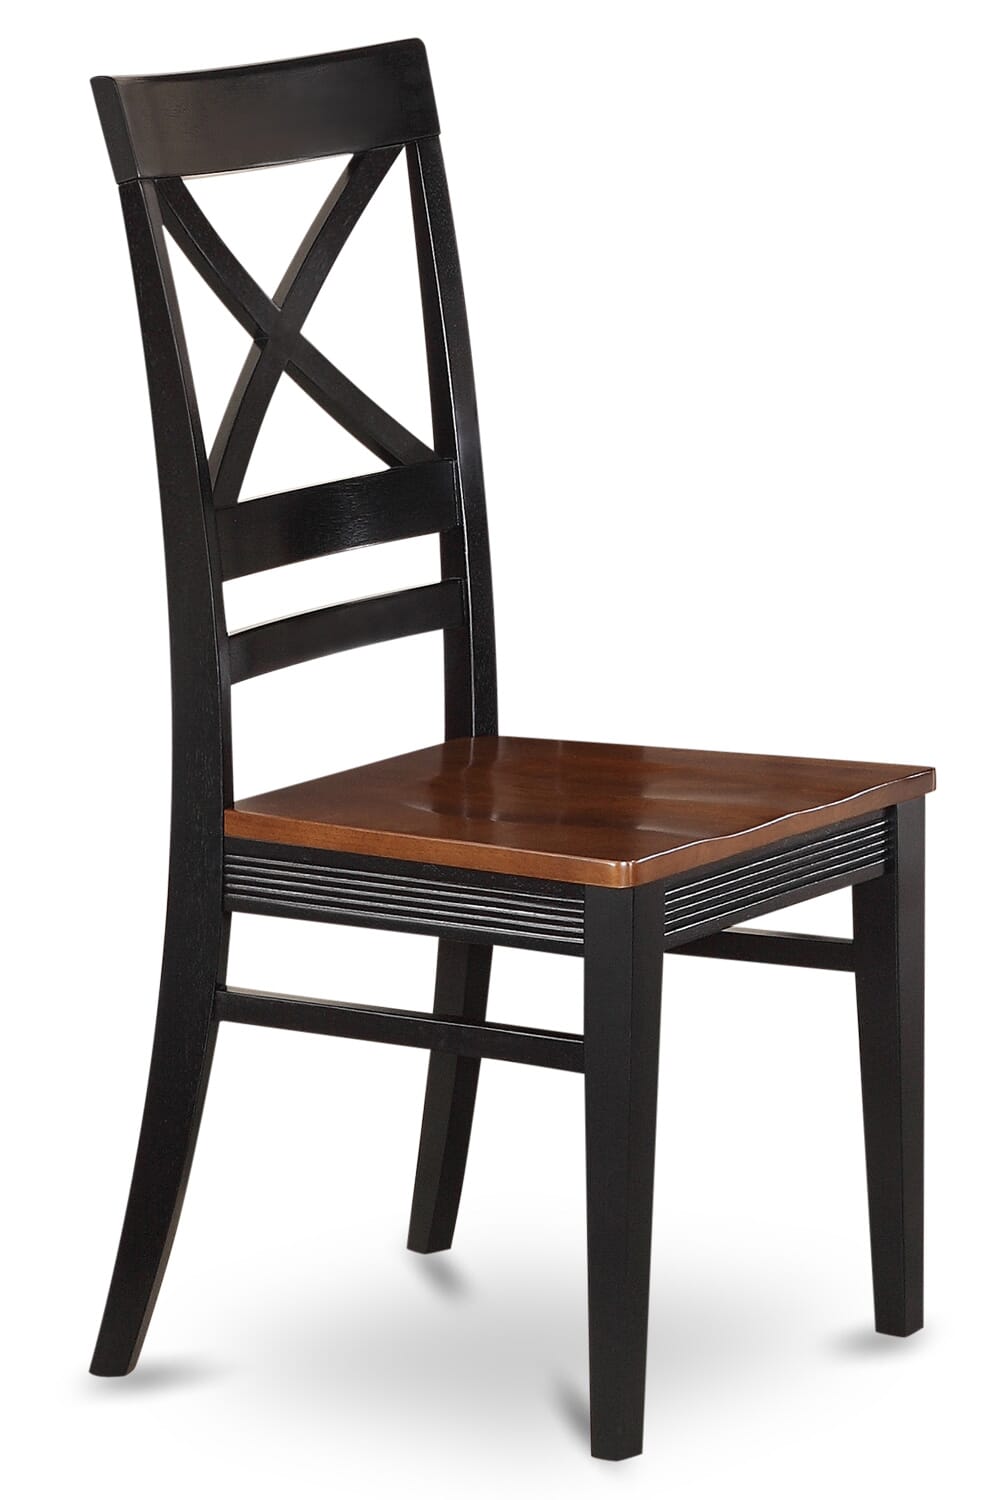 East West Furniture AMQU3-BCH-W 3 Piece Kitchen Table & Chairs Set Contains a Round Dining Room Table with Pedestal and 2 Dining Room Chairs, 36x36 Inch, Black & Cherry